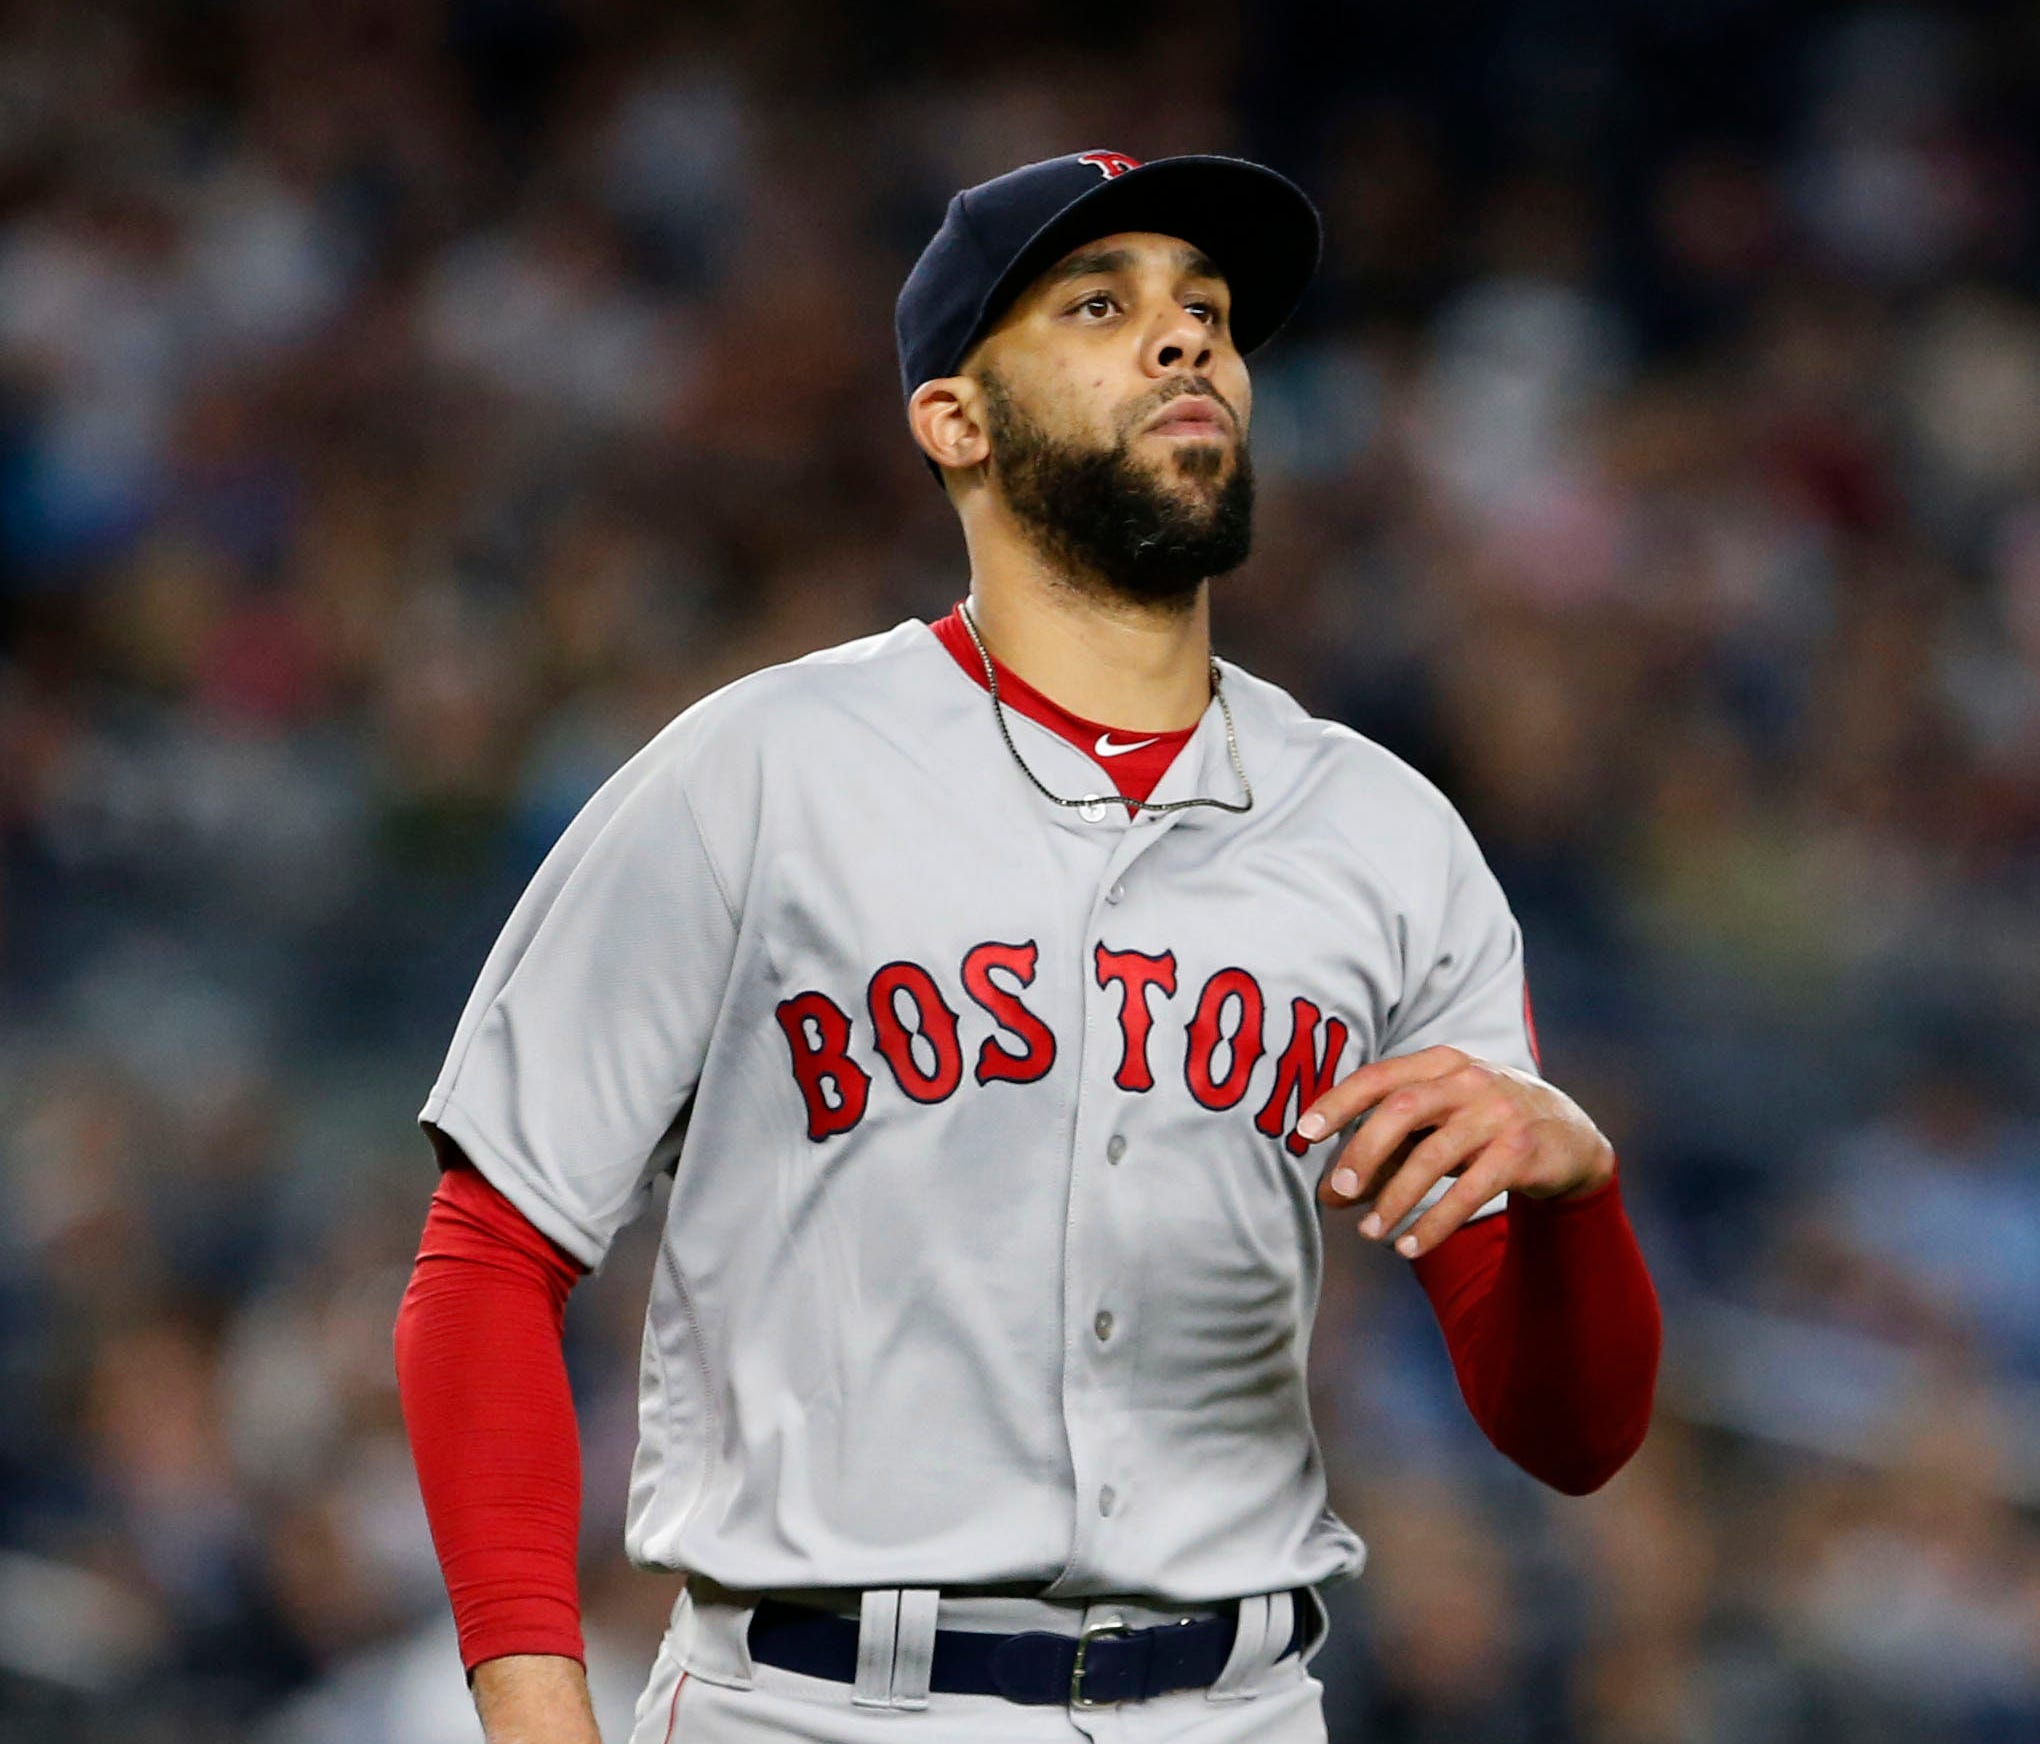 David Price is 5-3 with a 3.82 ERA in 11 starts.